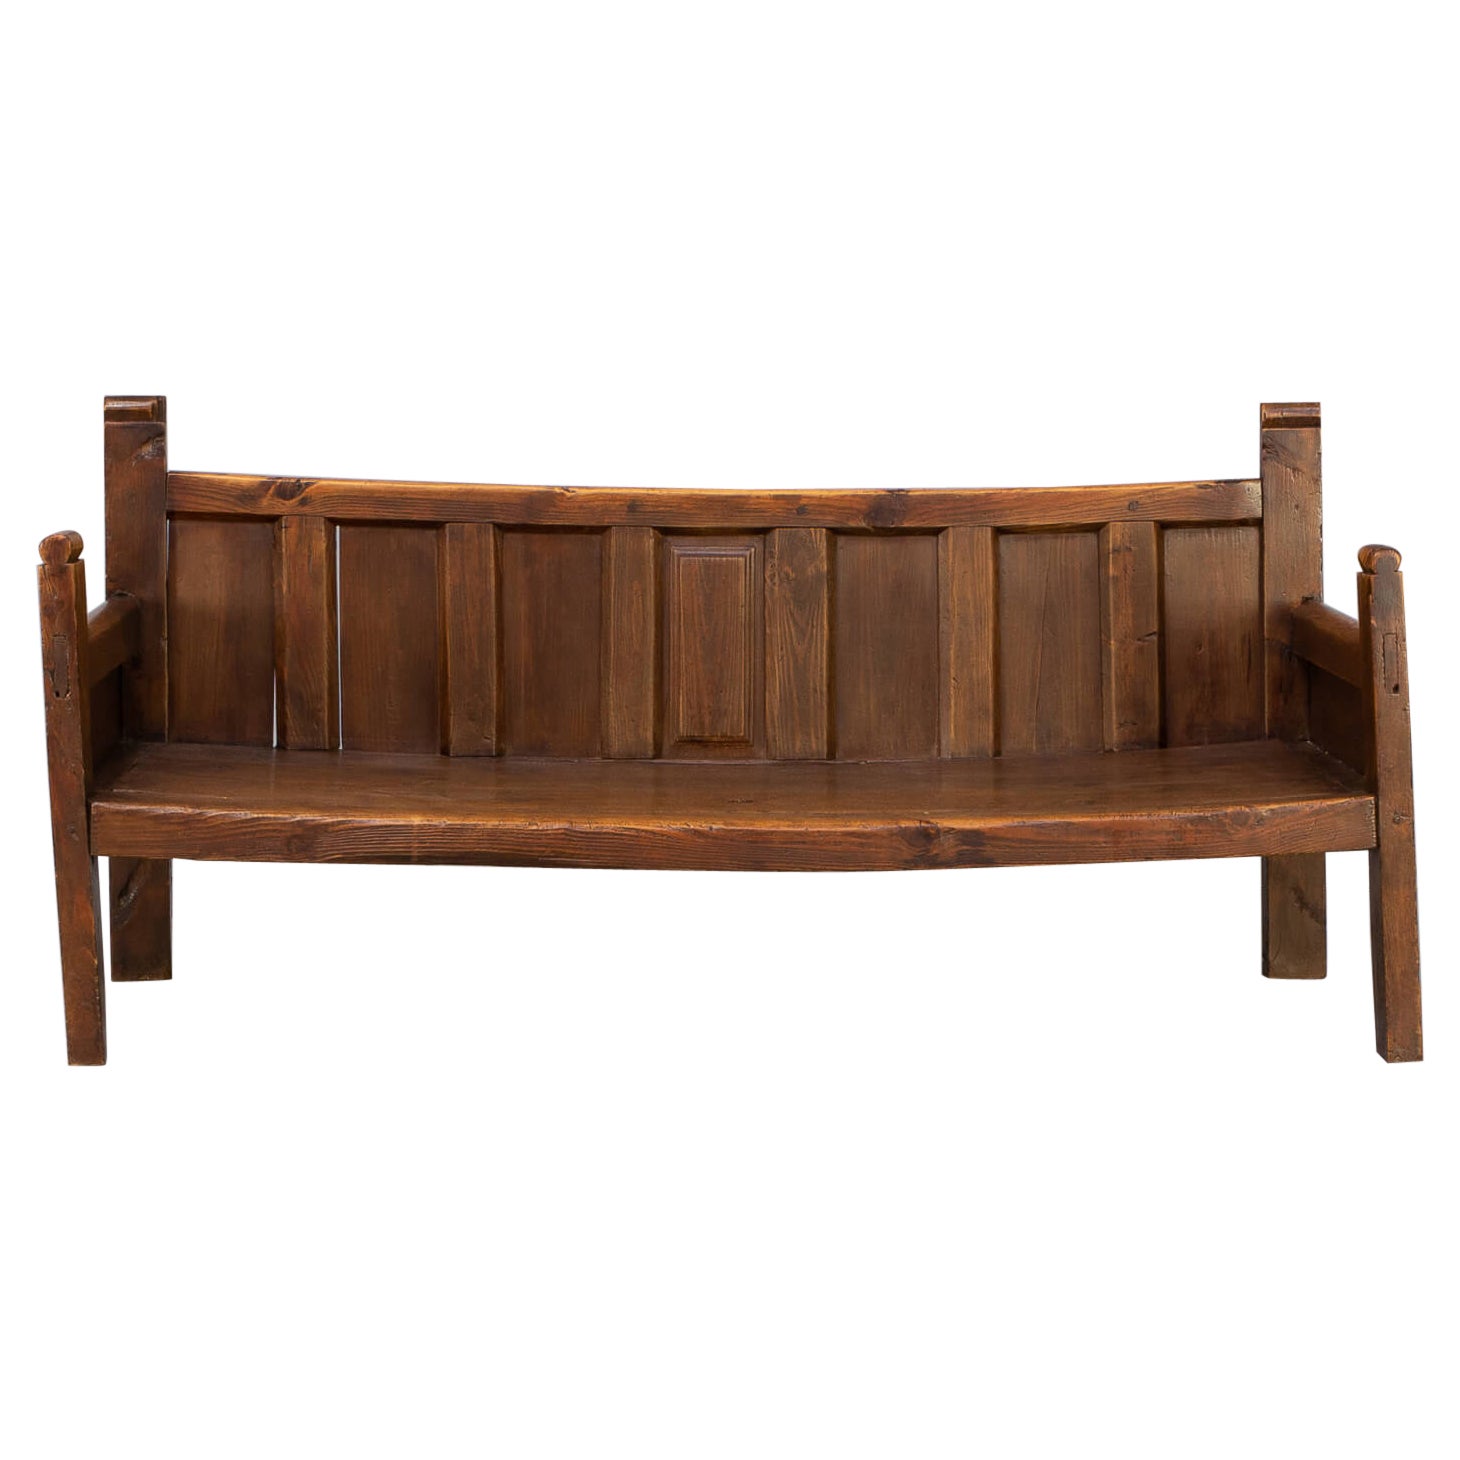 19th Century Rustic Oak Wooden Bench For Sale